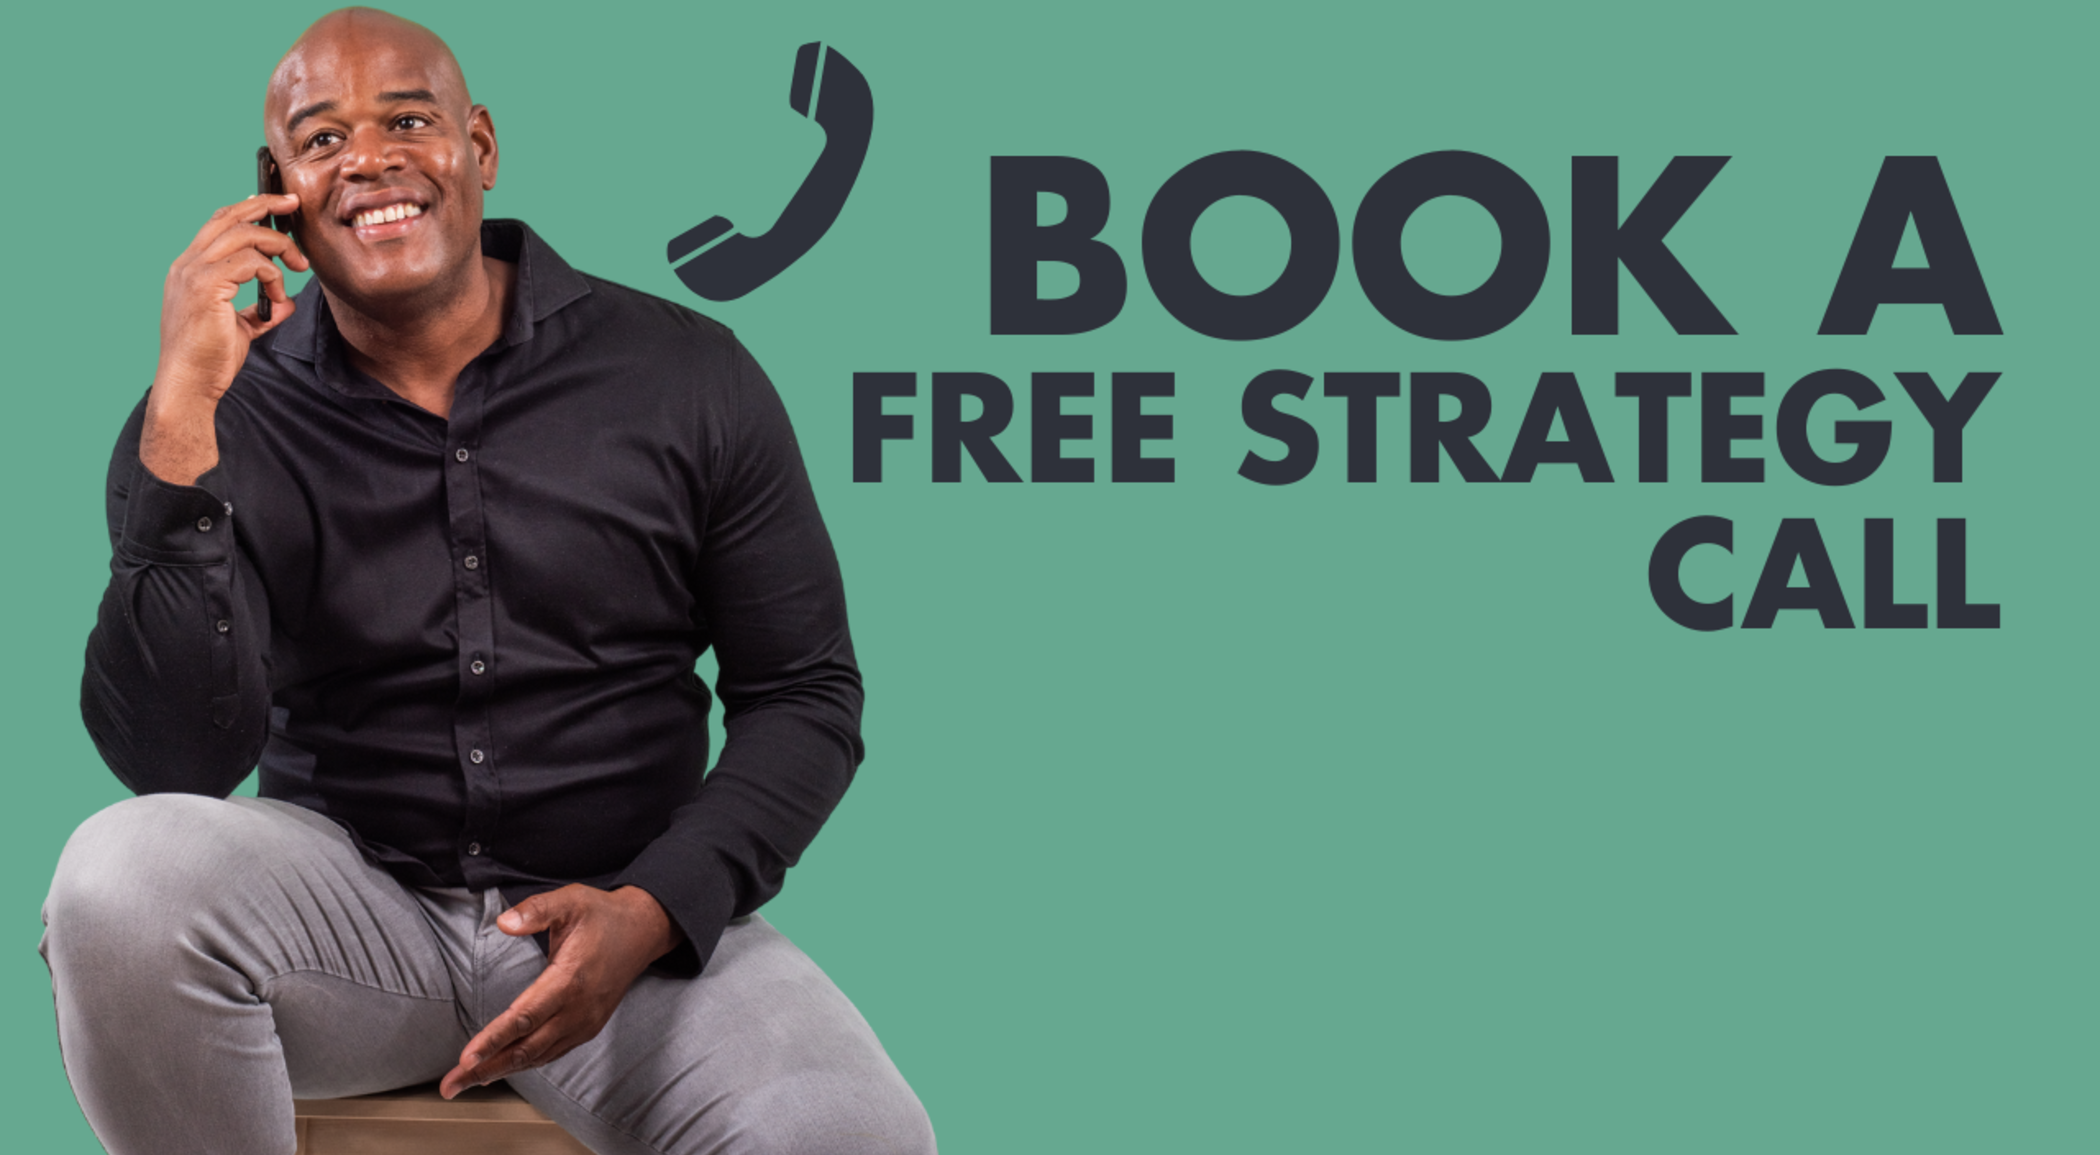 Book a FREE strategy call